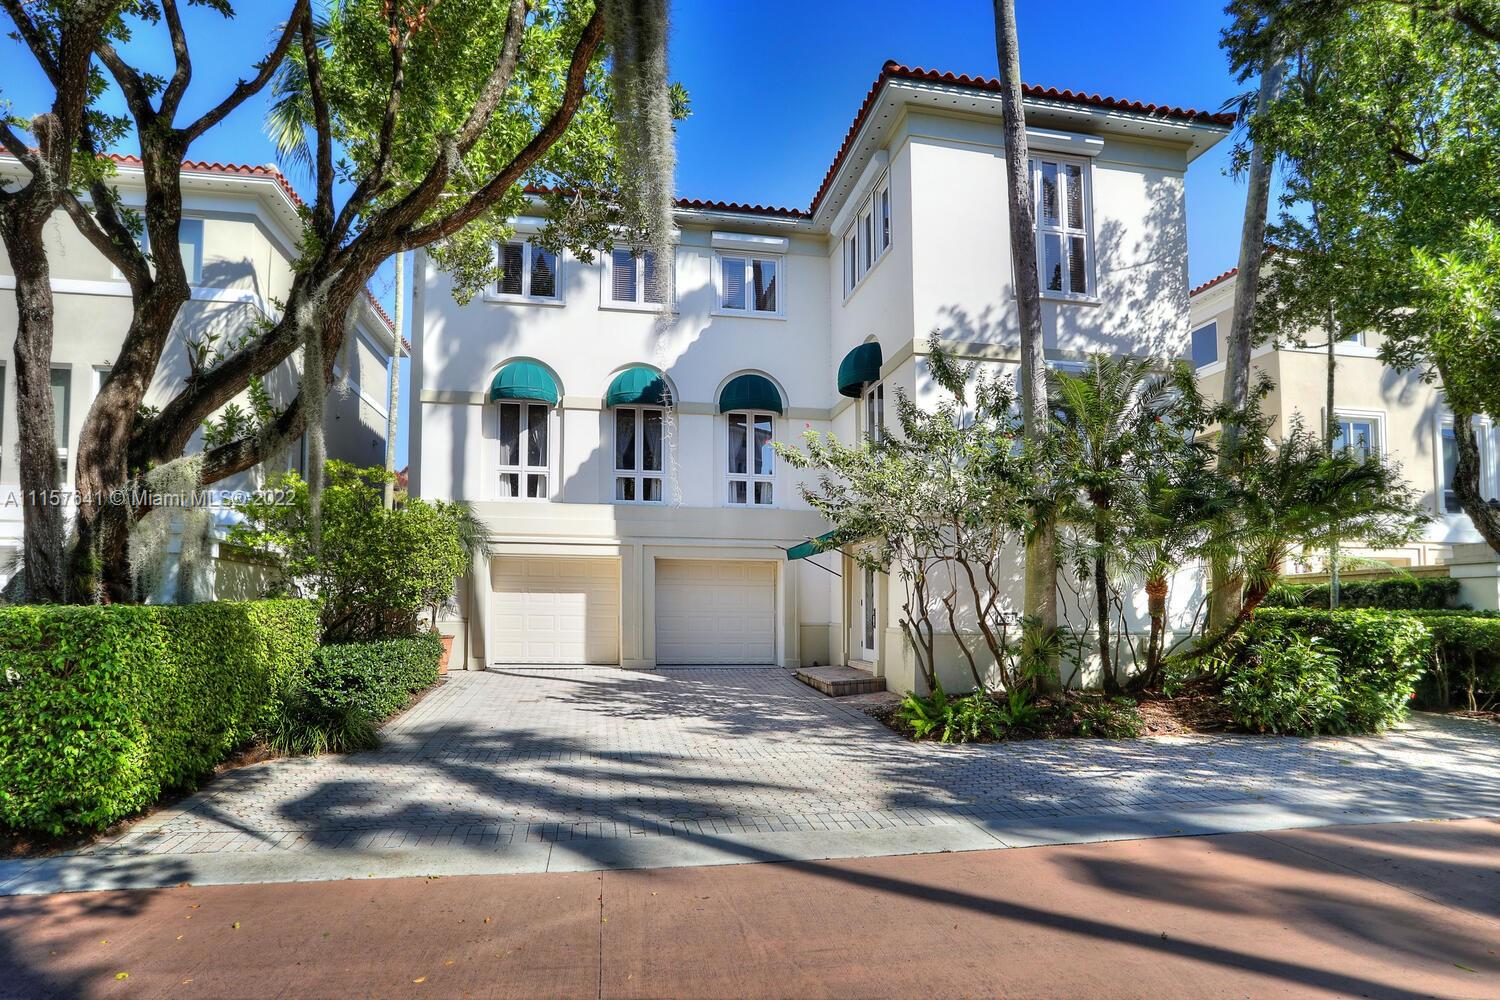 "Bayshore Villas" is an exceptional, guard-gated community in Coconut Grove with twenty-five villas on an oak lined private street.  This home has three floors with an elevator and an oversized garage. On the first level you will find a full bedroom and bath. The hallway takes you to a lovely private patio. The main level has a flexible layout, with a living room, family room and dining area.  The kitchen has an island and a separate breakfast room and top level includes the primary bedroom and two bedrooms, each with their own baths.  Amenities include tennis courts, pool and spa, and access to sunrises on Biscayne Bay. From time to time dock space is available. Walk to parks and yacht clubs!